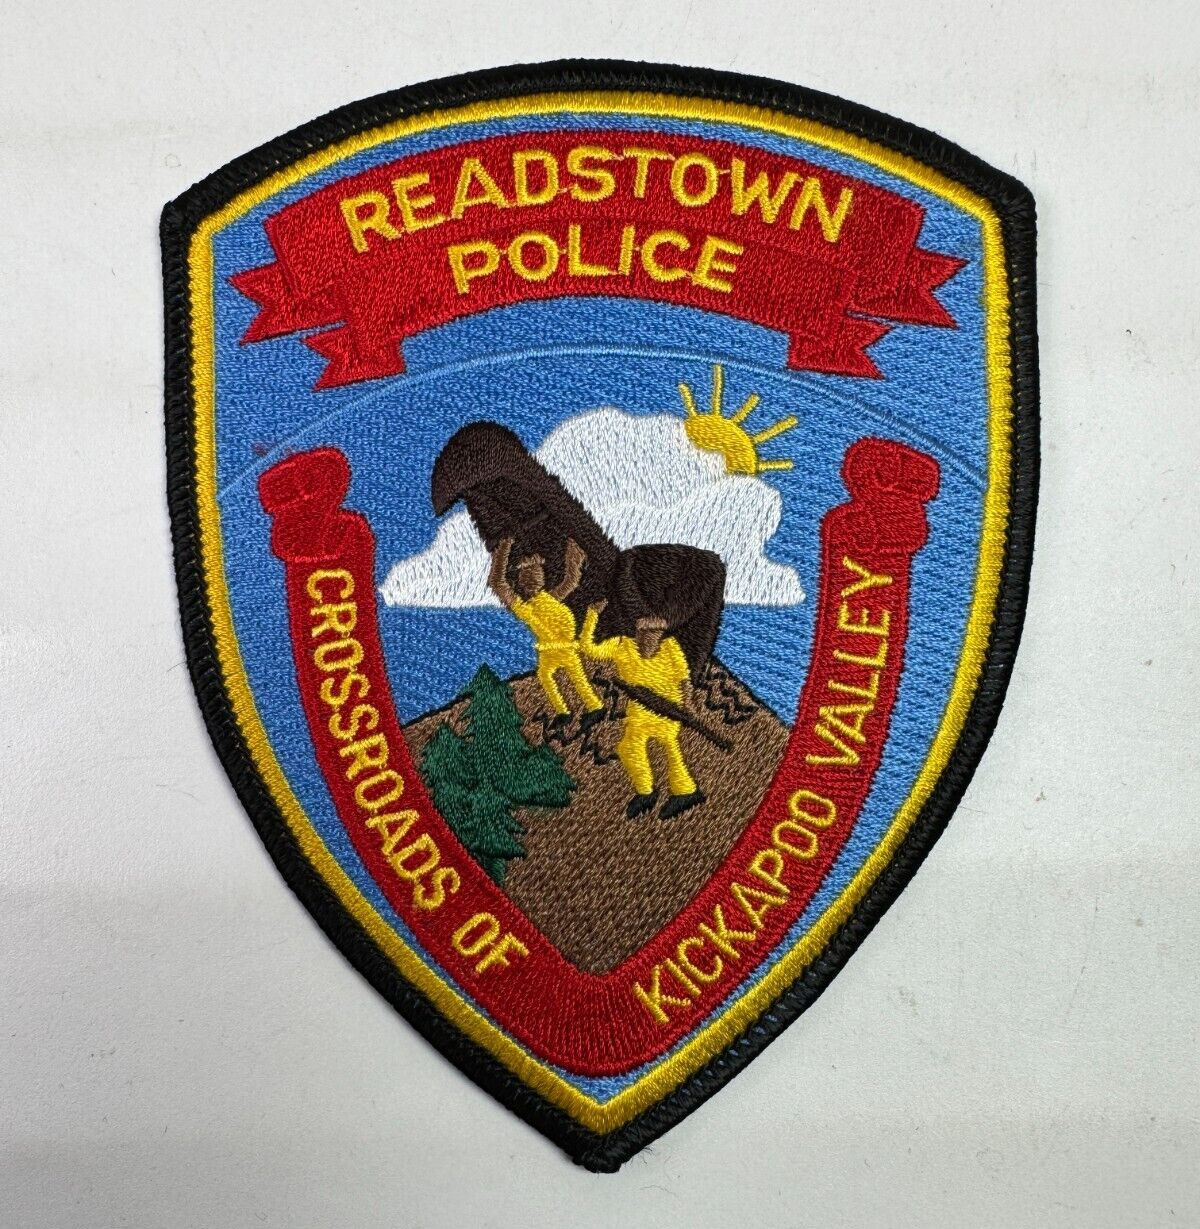 Readstown Police Wisconsin Vernon County Crossroads of Kickapoo Valley Patch R2